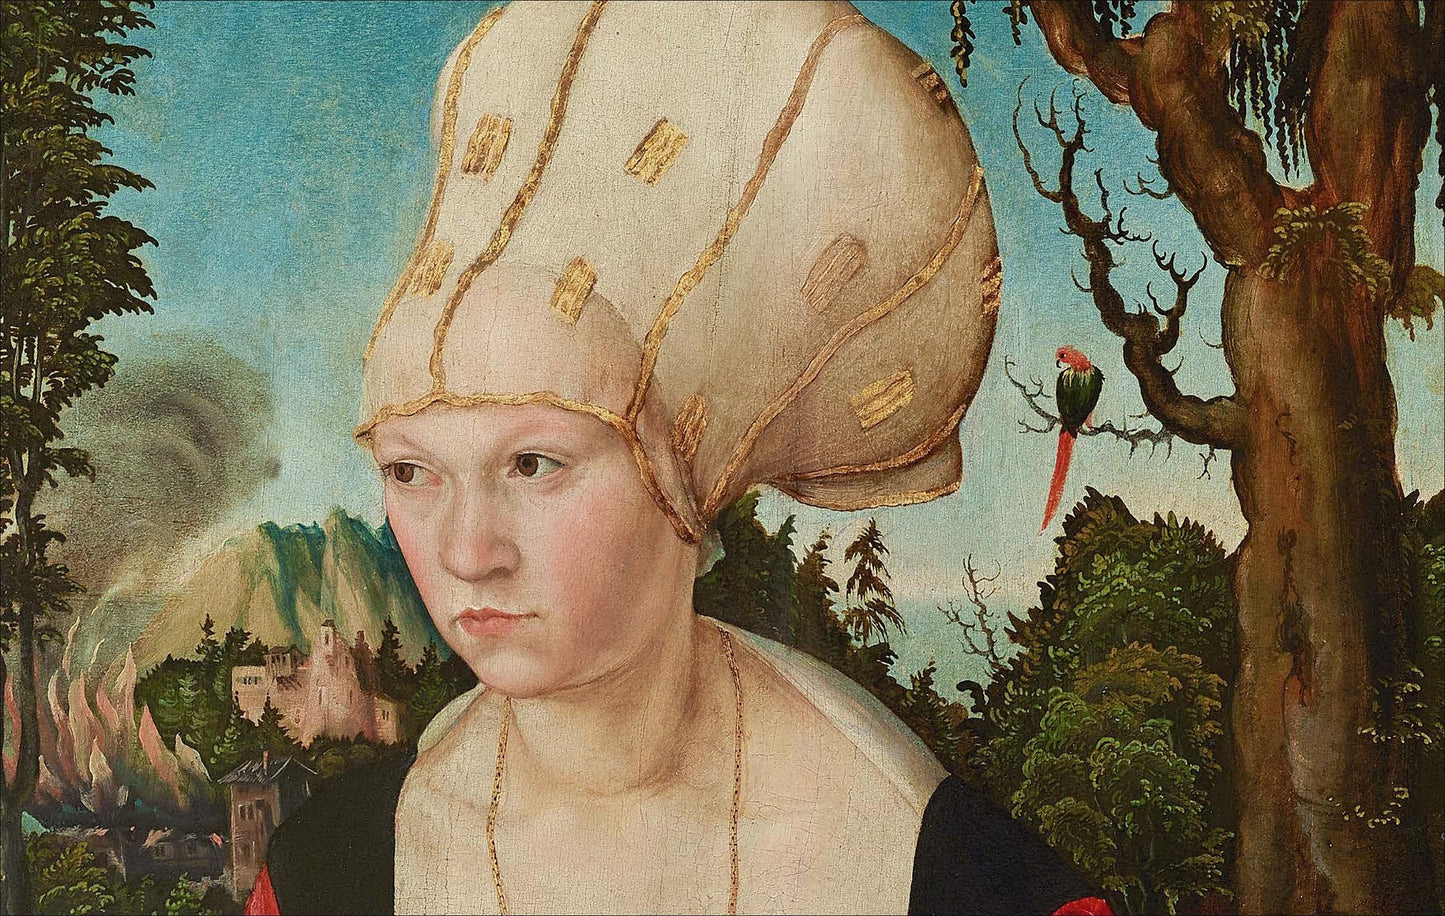 Cranach: The Early Years in Vienna